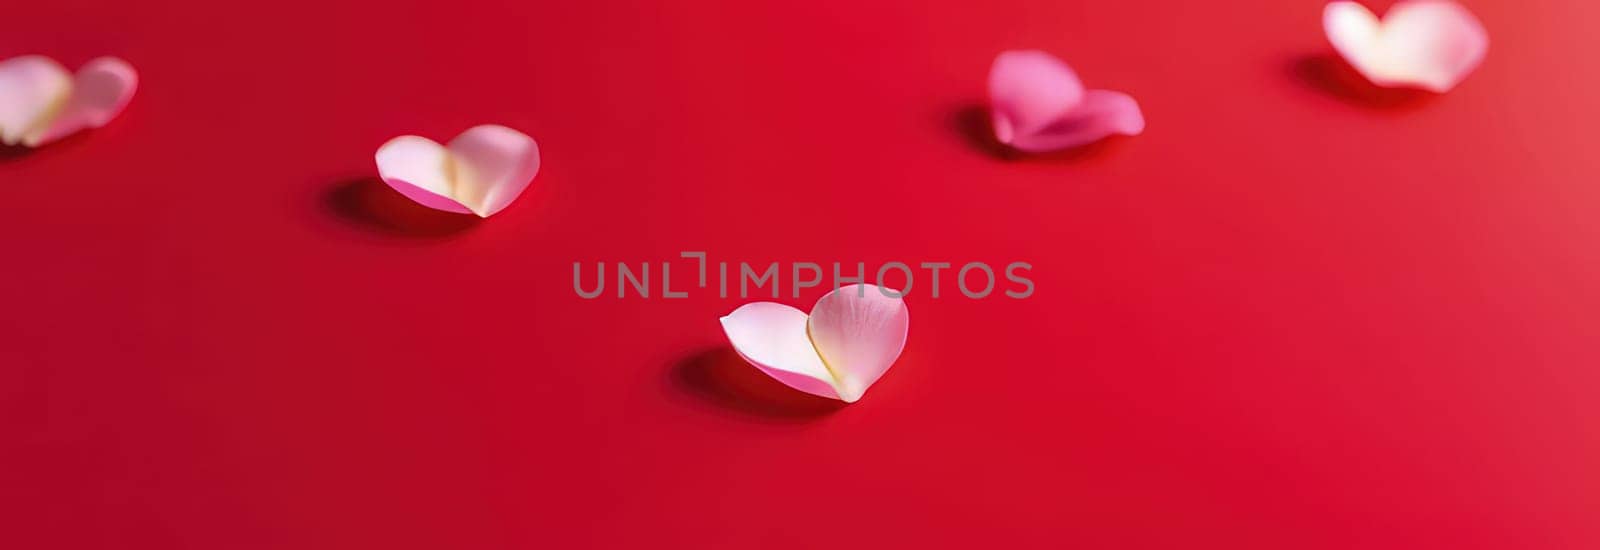 St. Valentines day, wedding banner with rose petals on red background, wedding love and romance card template texture. Copy space. Use for cute love sale banner, voucher, greeting card, wrapping paper